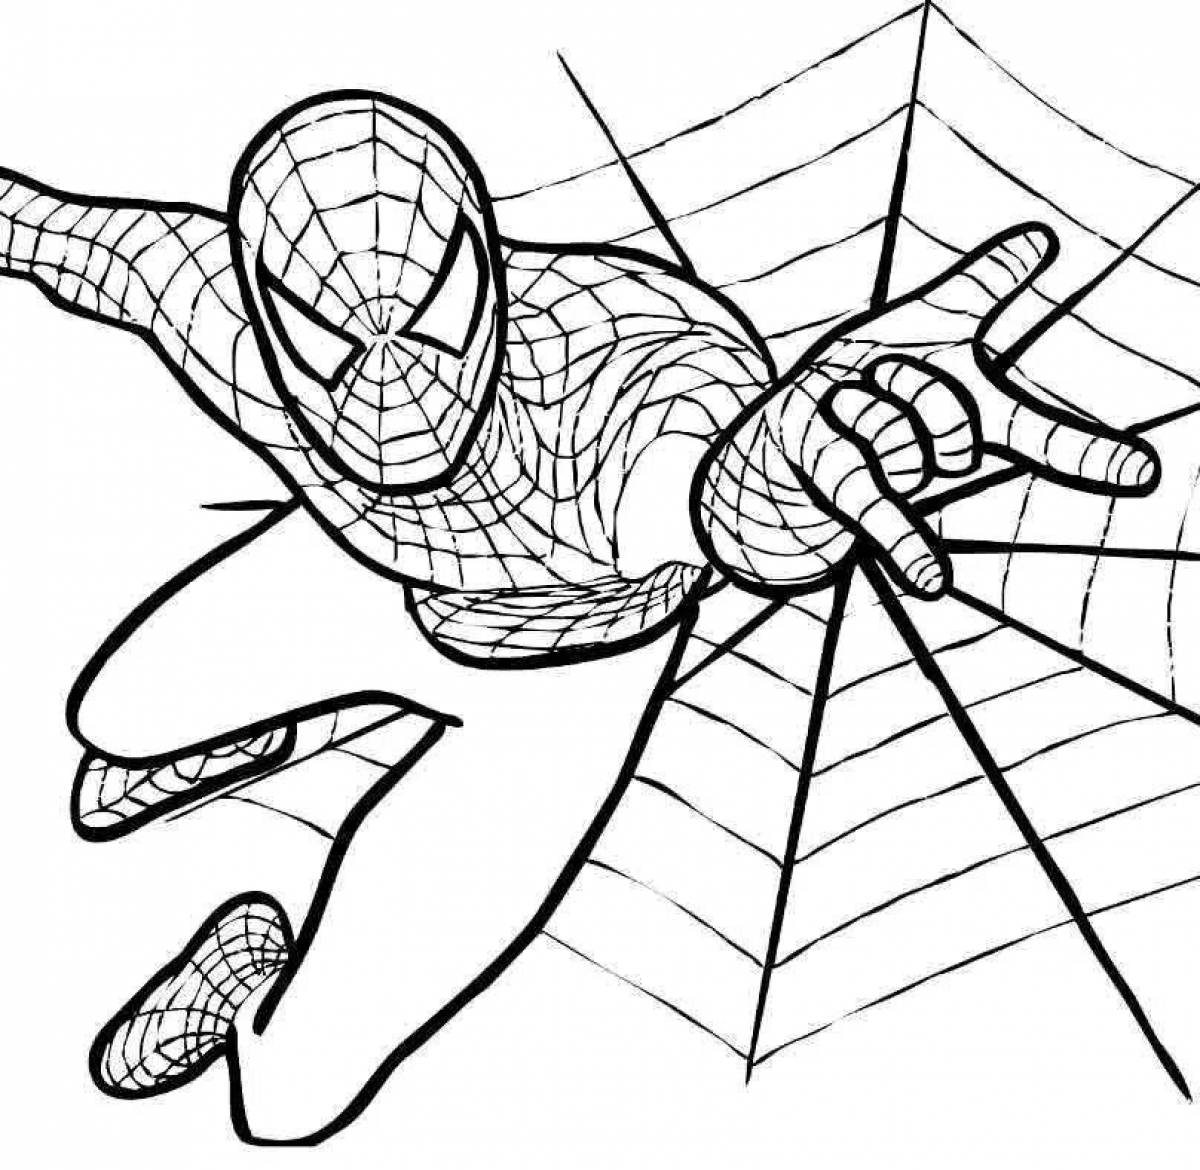 Spiderman colorful coloring page